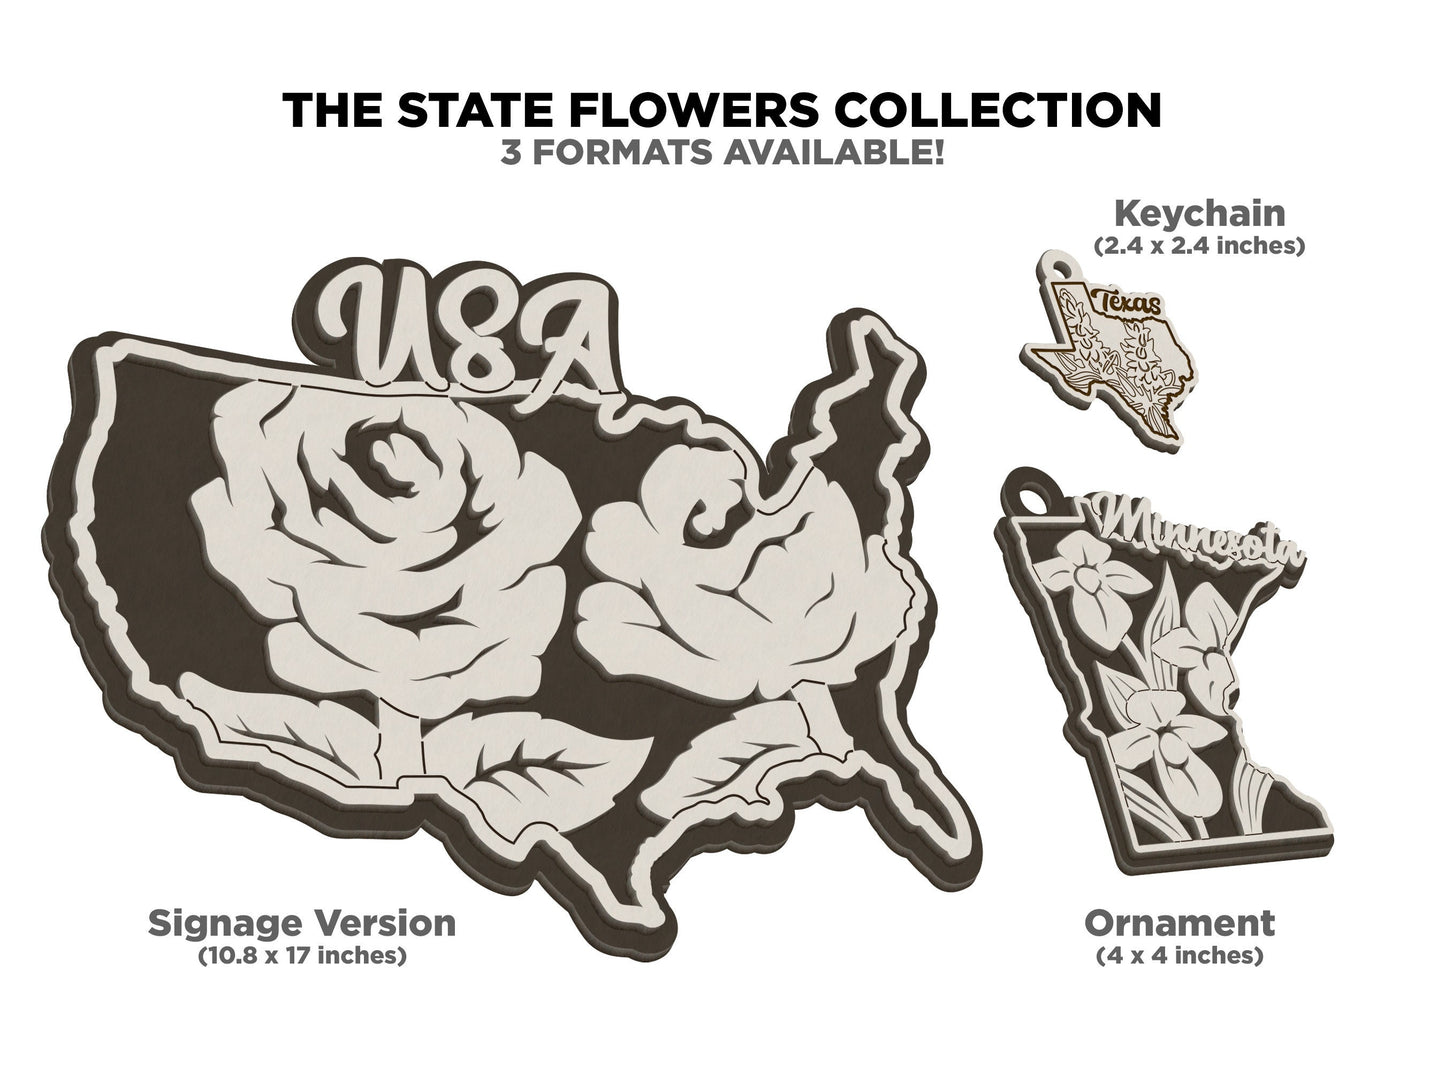 Tennessee State Flower Collection - Ornaments, Keychains & Signage Included - SVG, PDF, AI File types - Works With All Lasers